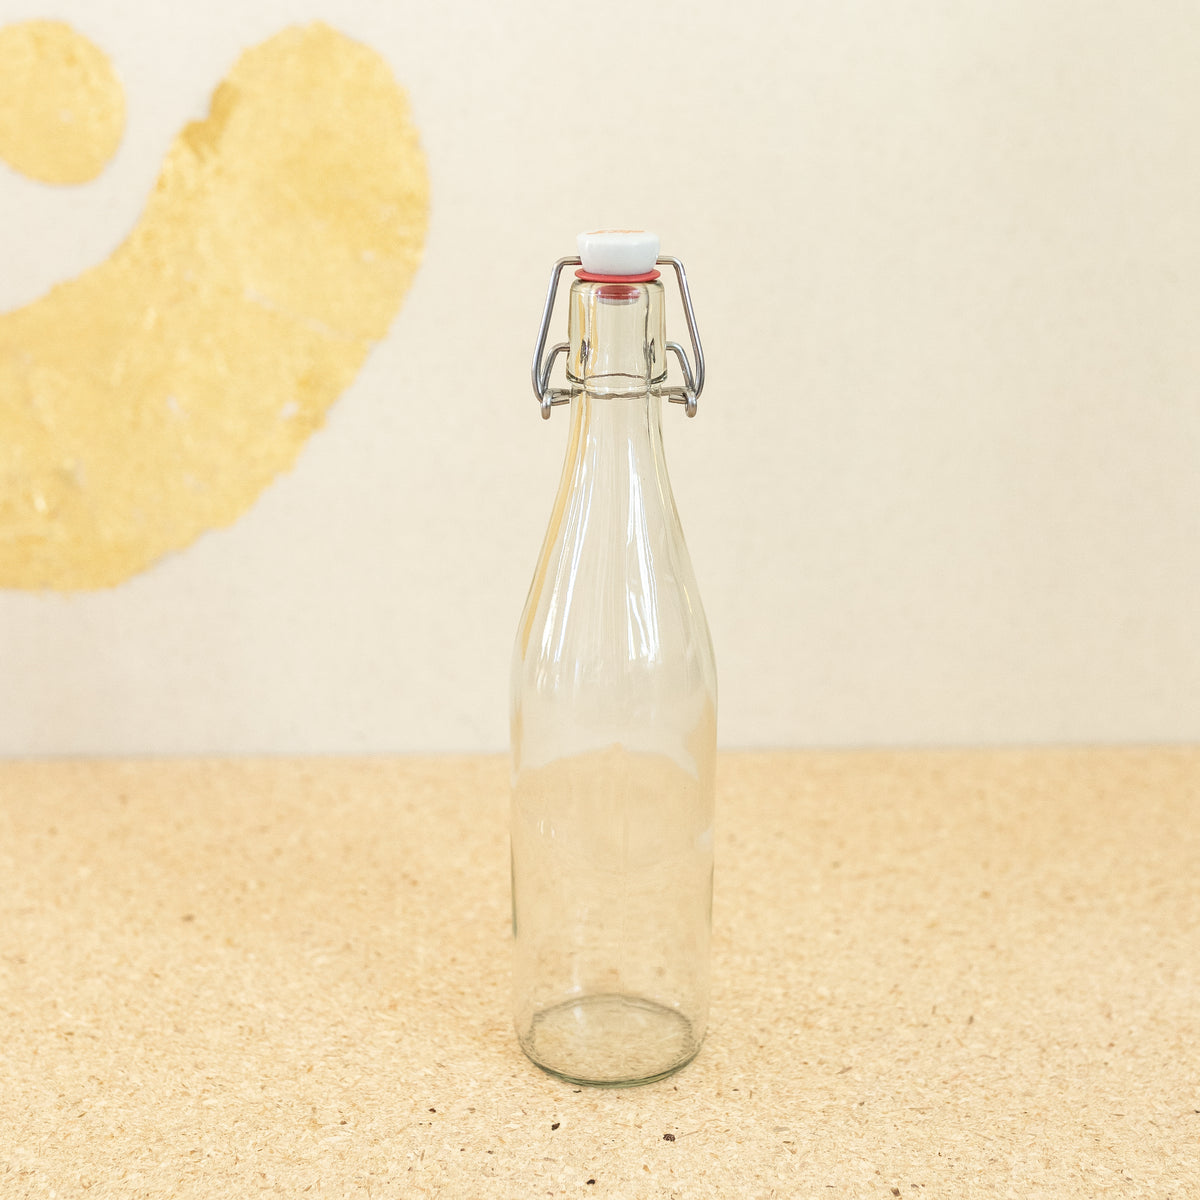 Le Parfait Bottles – French Glass Milk Or Swing Top Bottles For